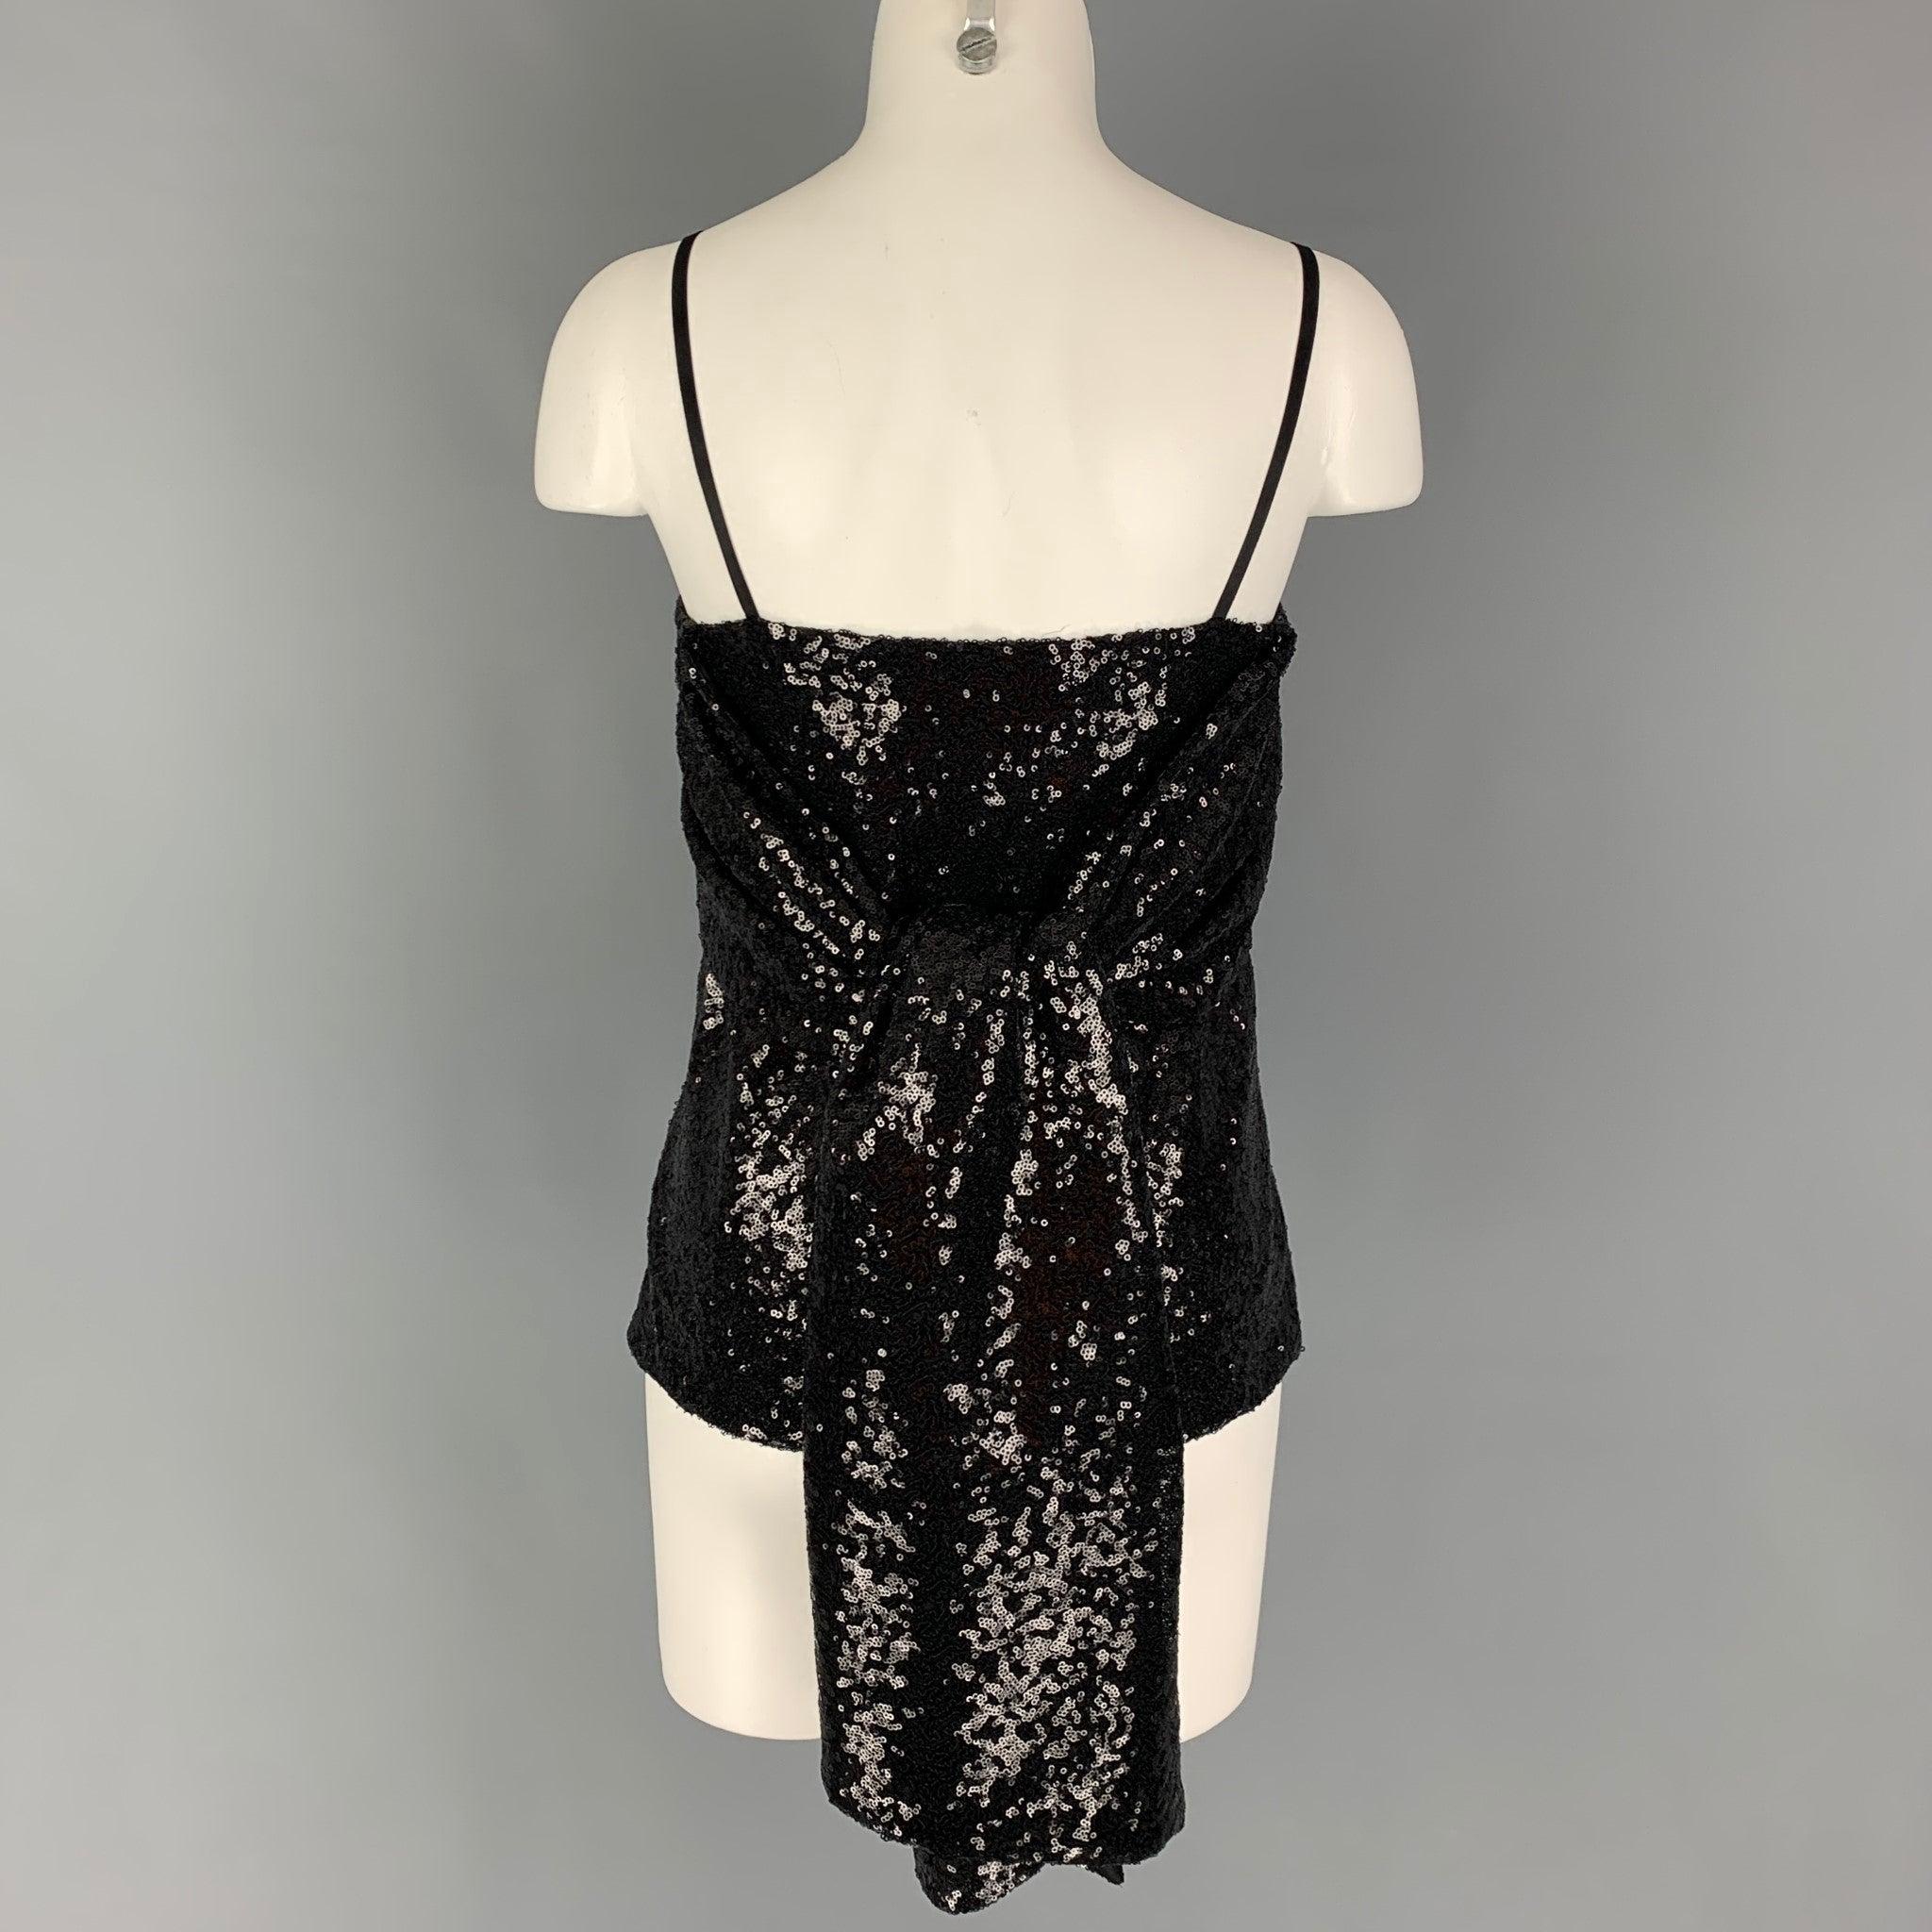 PRABAL GURUNG dress top comes in a red sequined polyester featuring a long draped strap design, side slits, and spaghetti straps. Made in USA. Excellent Pre-Owned Condition. 

Marked:   0 

Measurements: 
  Bust: 30 inches  Length: 15 inches 

  
 